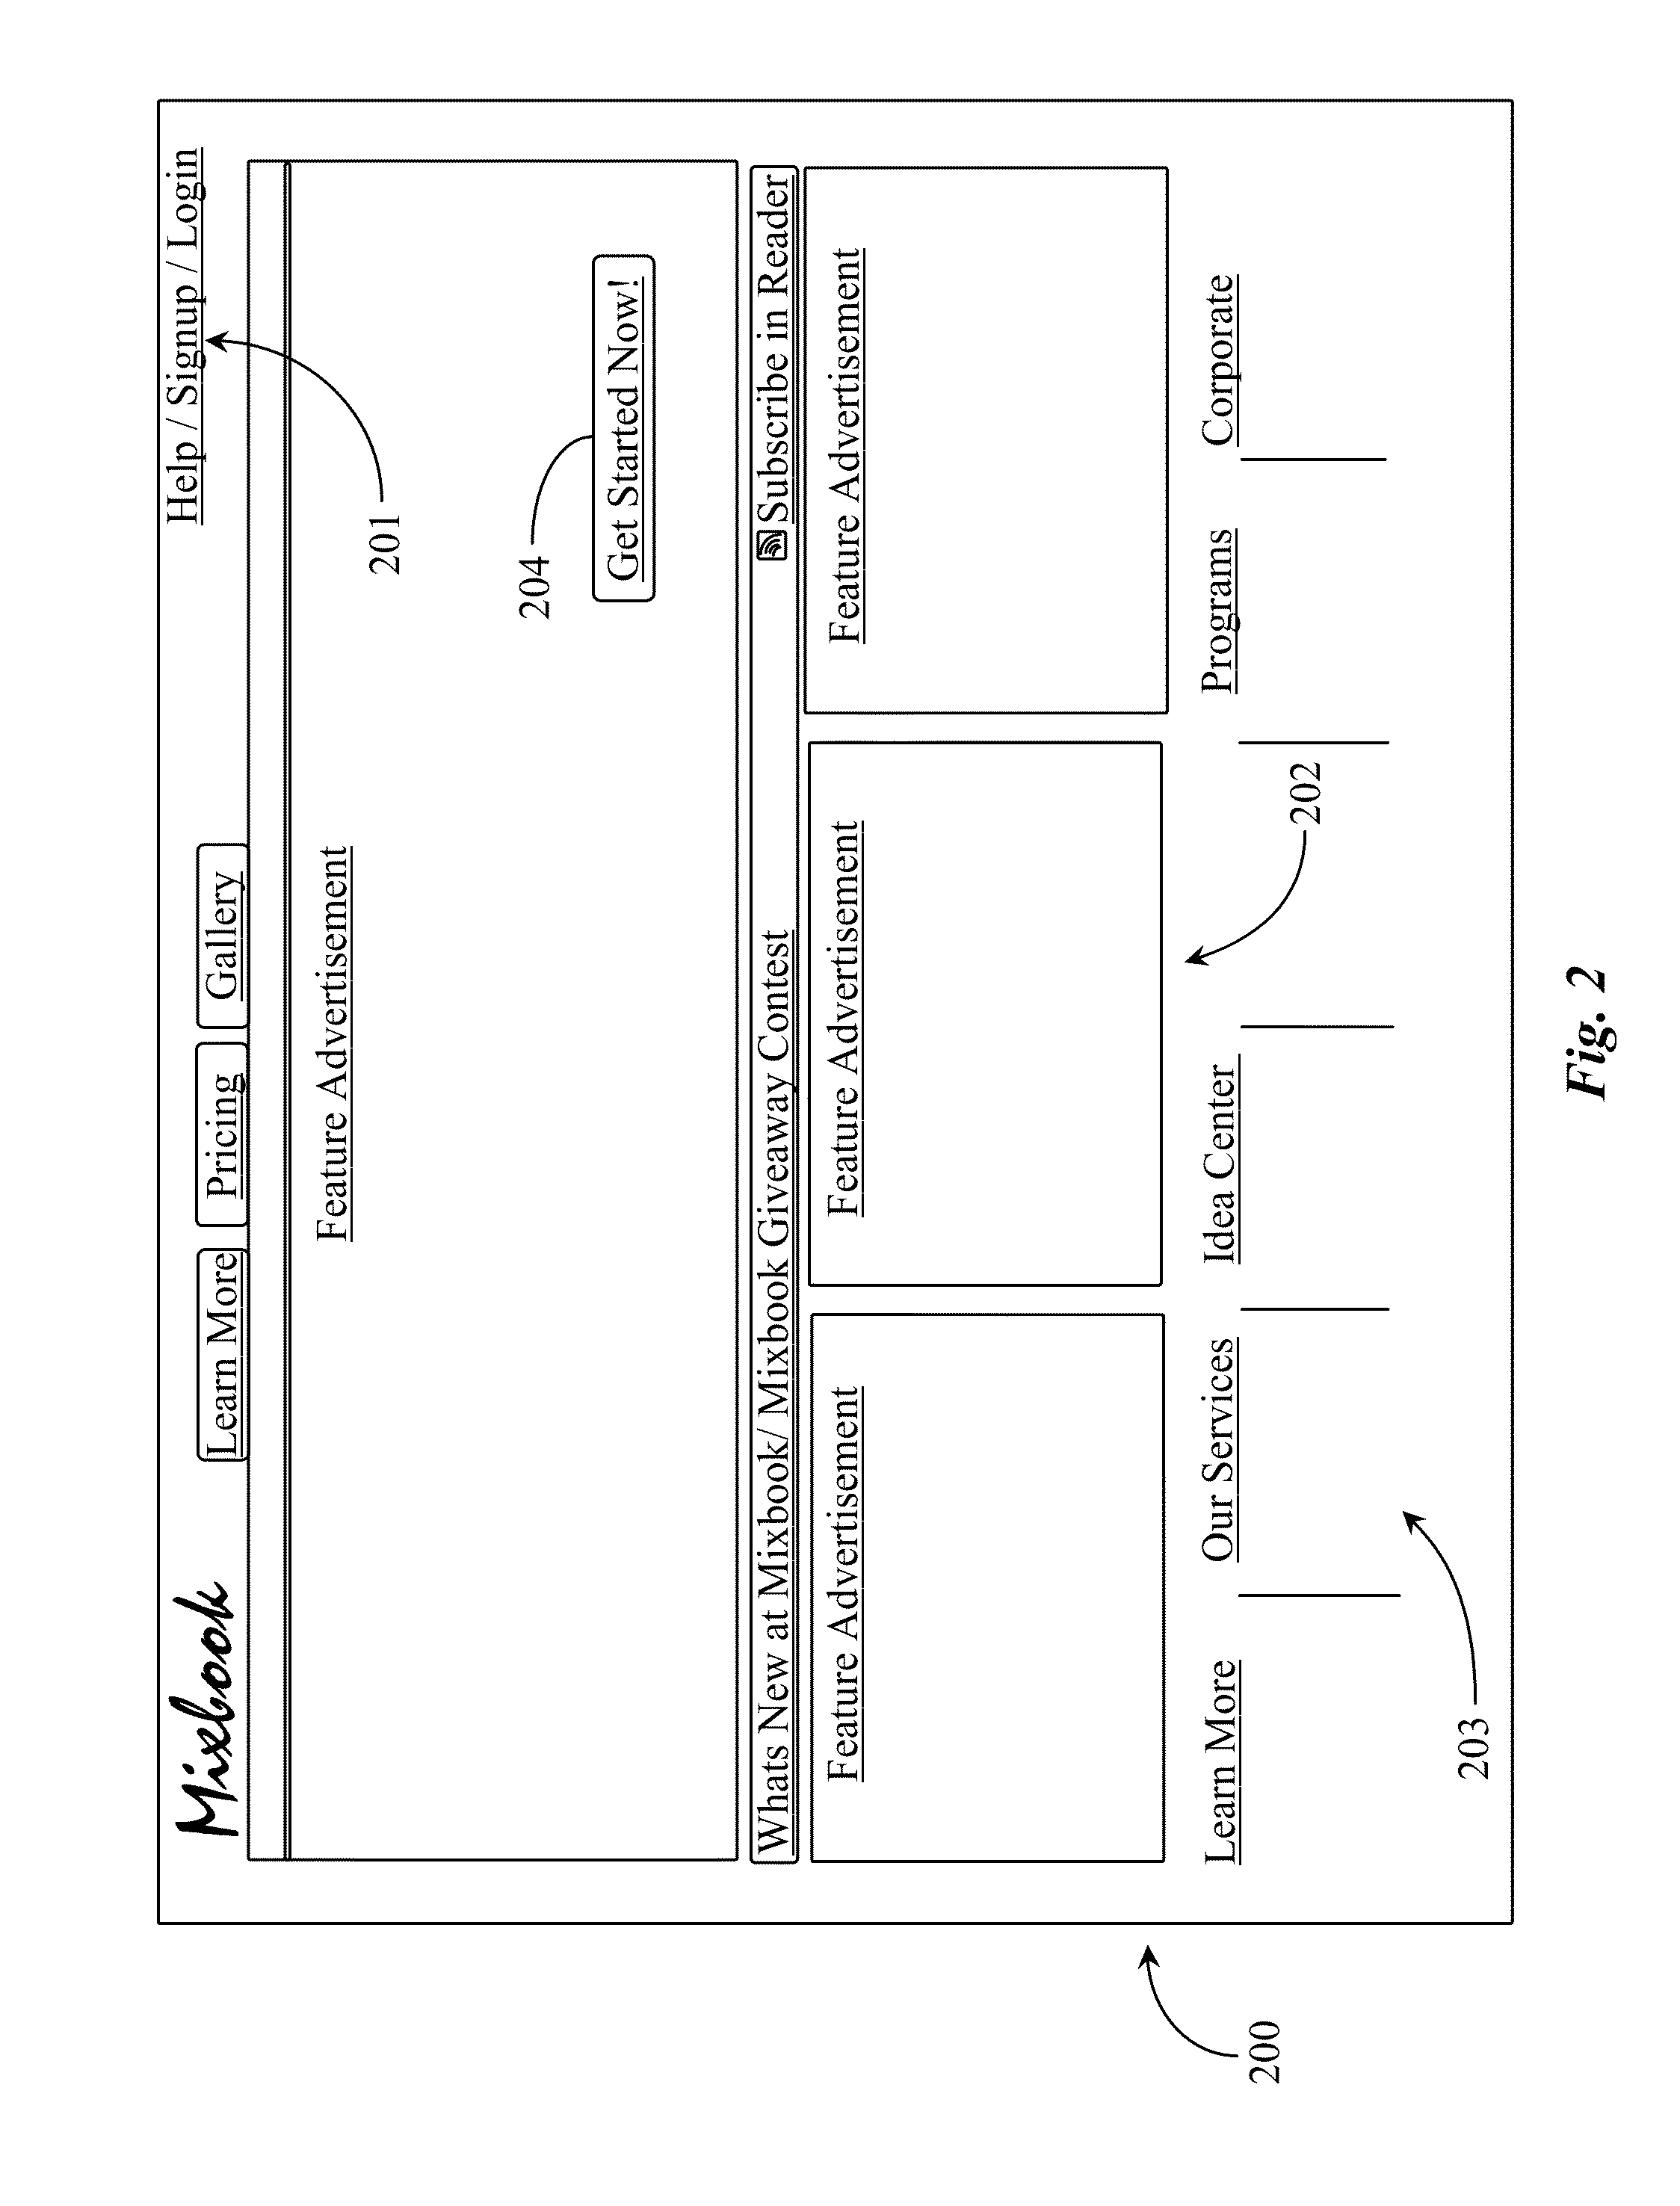 Methods for Establishing Simulated Force Dynamics Between Two or More Digital Assets Displayed in an Electronic Interface